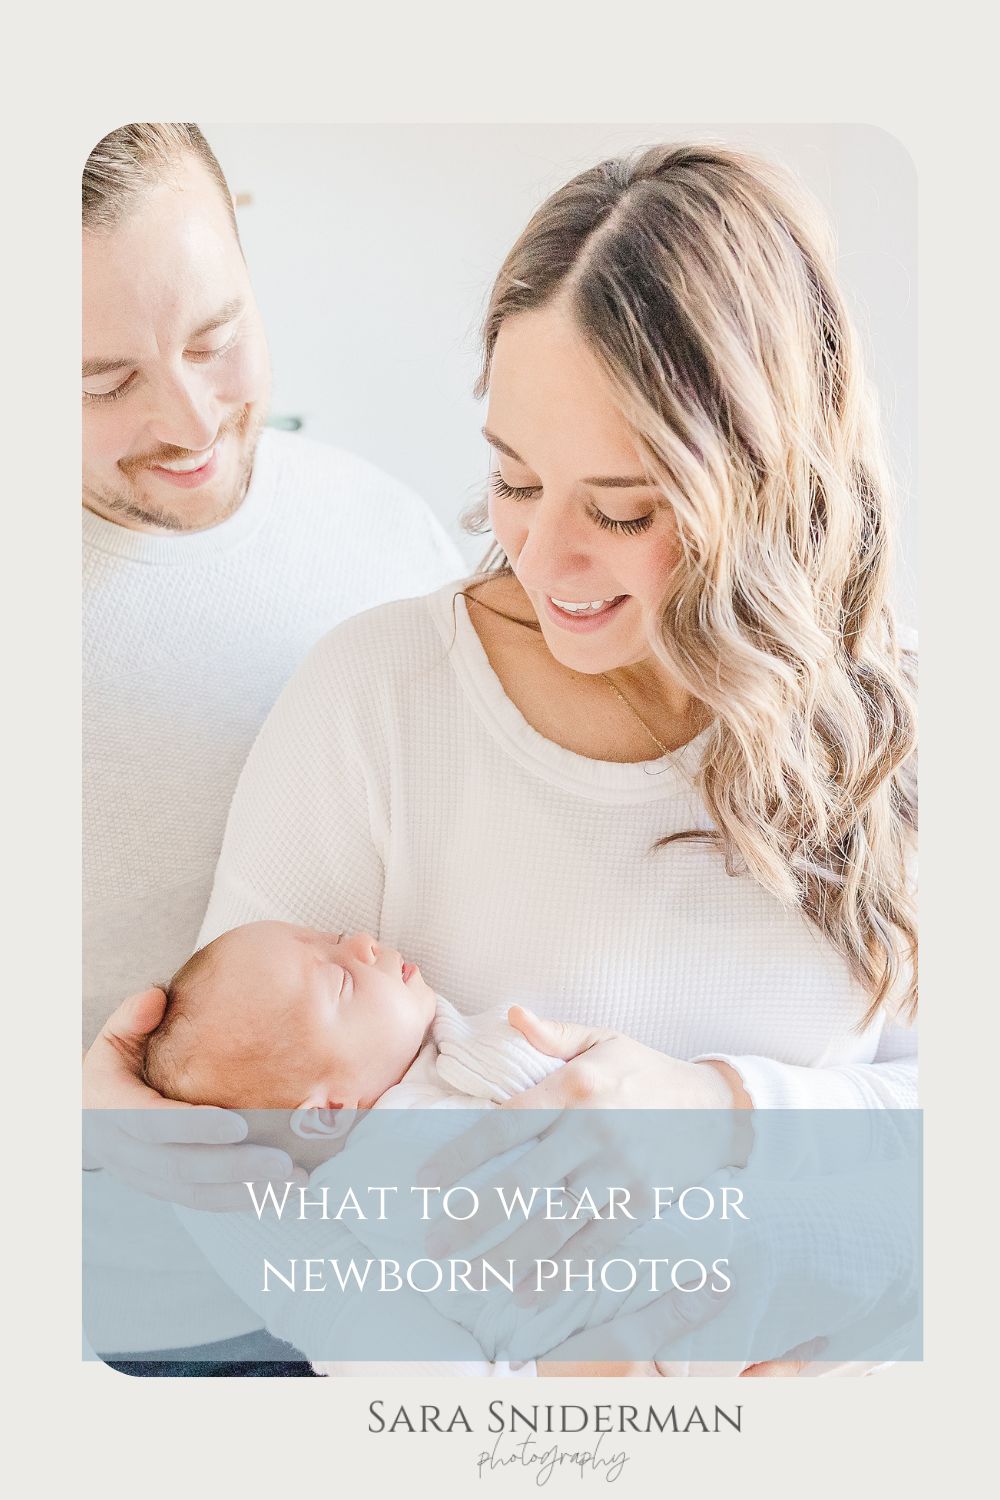 What to wear for newborn photos : Sara Sniderman Photography